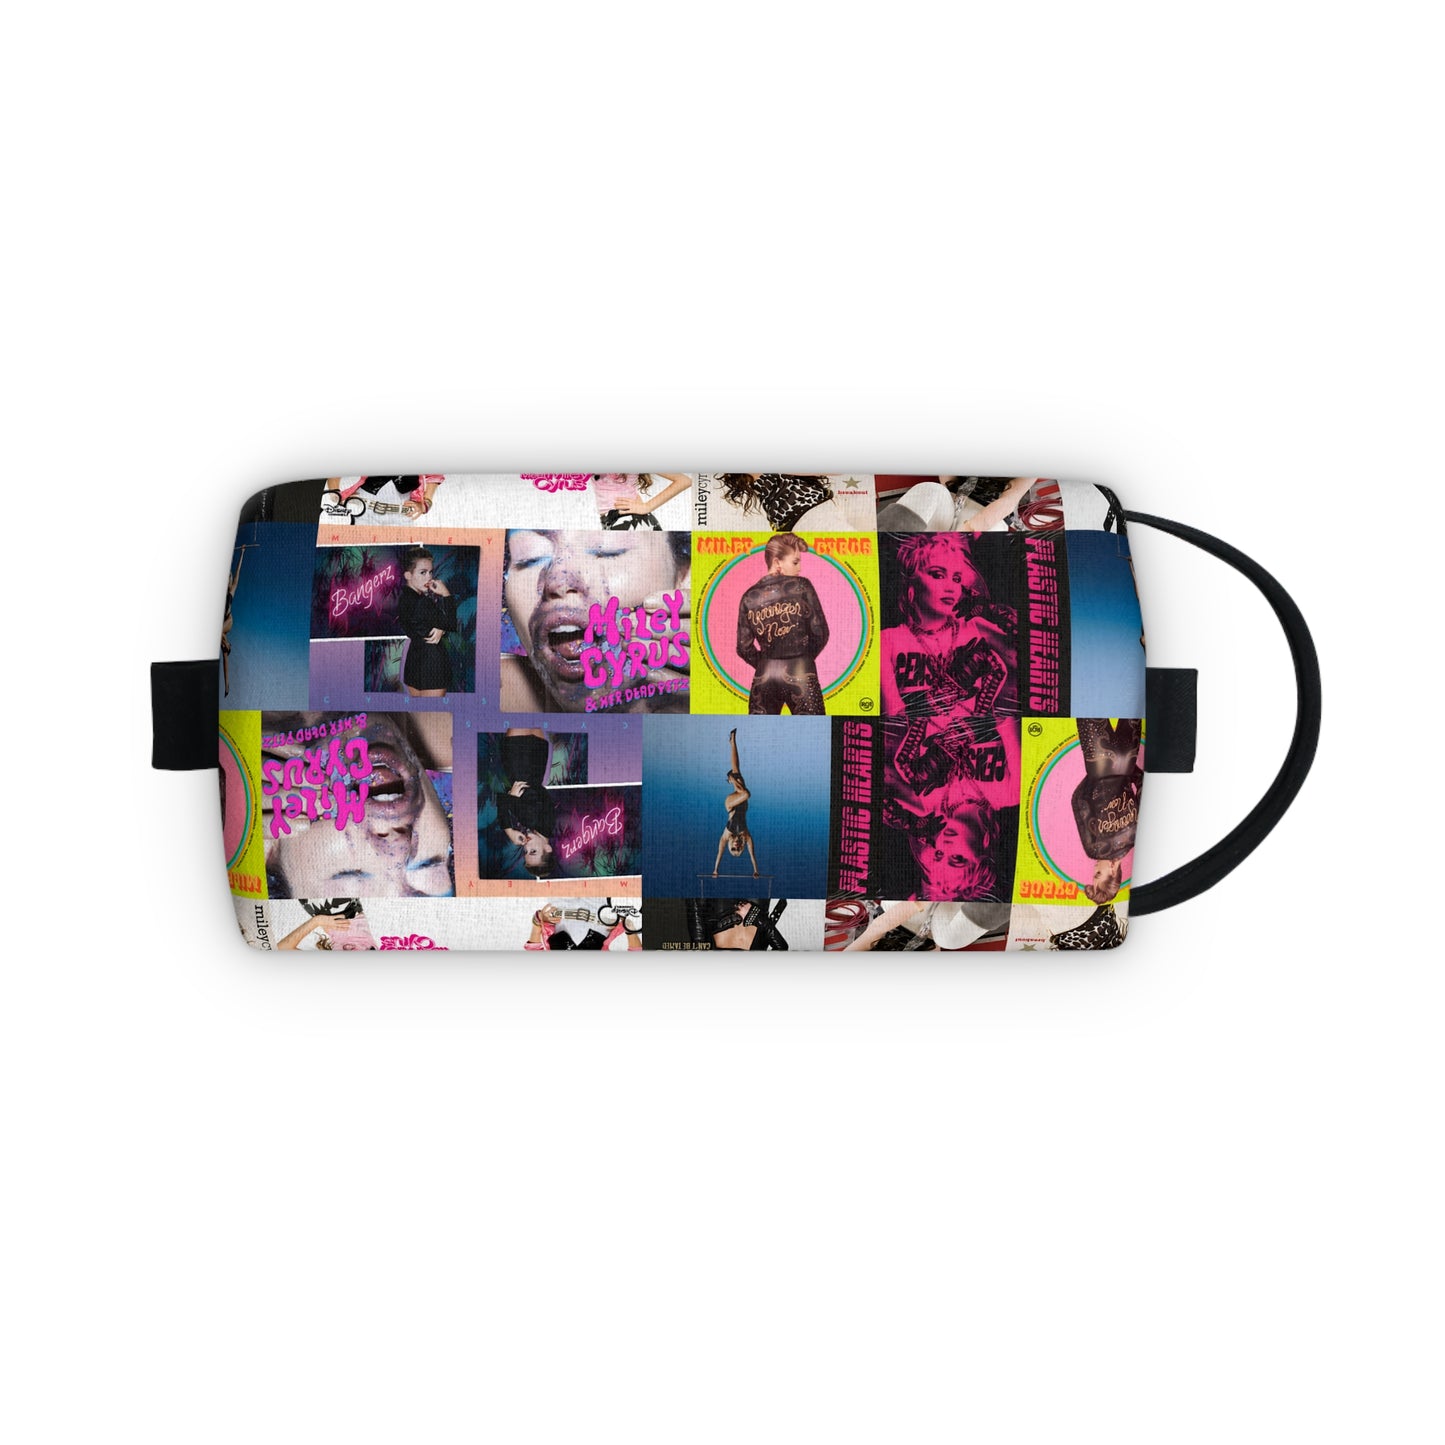 Miley Cyrus Album Cover Collage Toiletry Bag